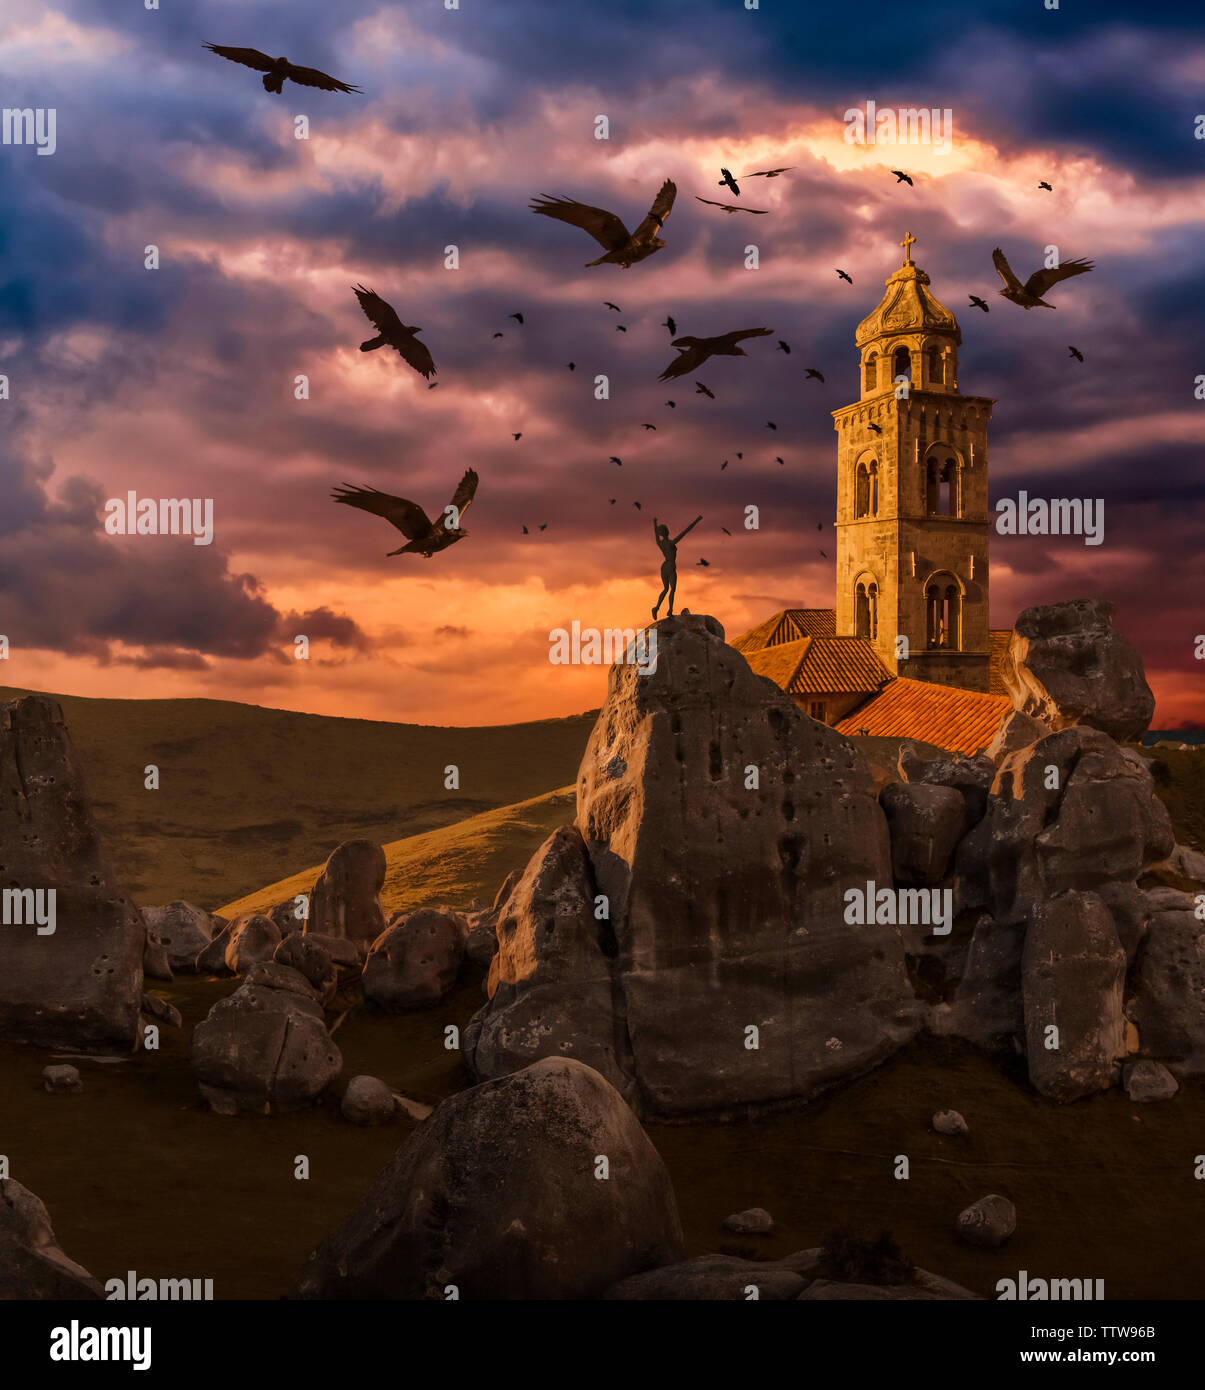 Crows flying towards a church tower with a wooden human mannequin laying on the ground in the foreground Stock Photo